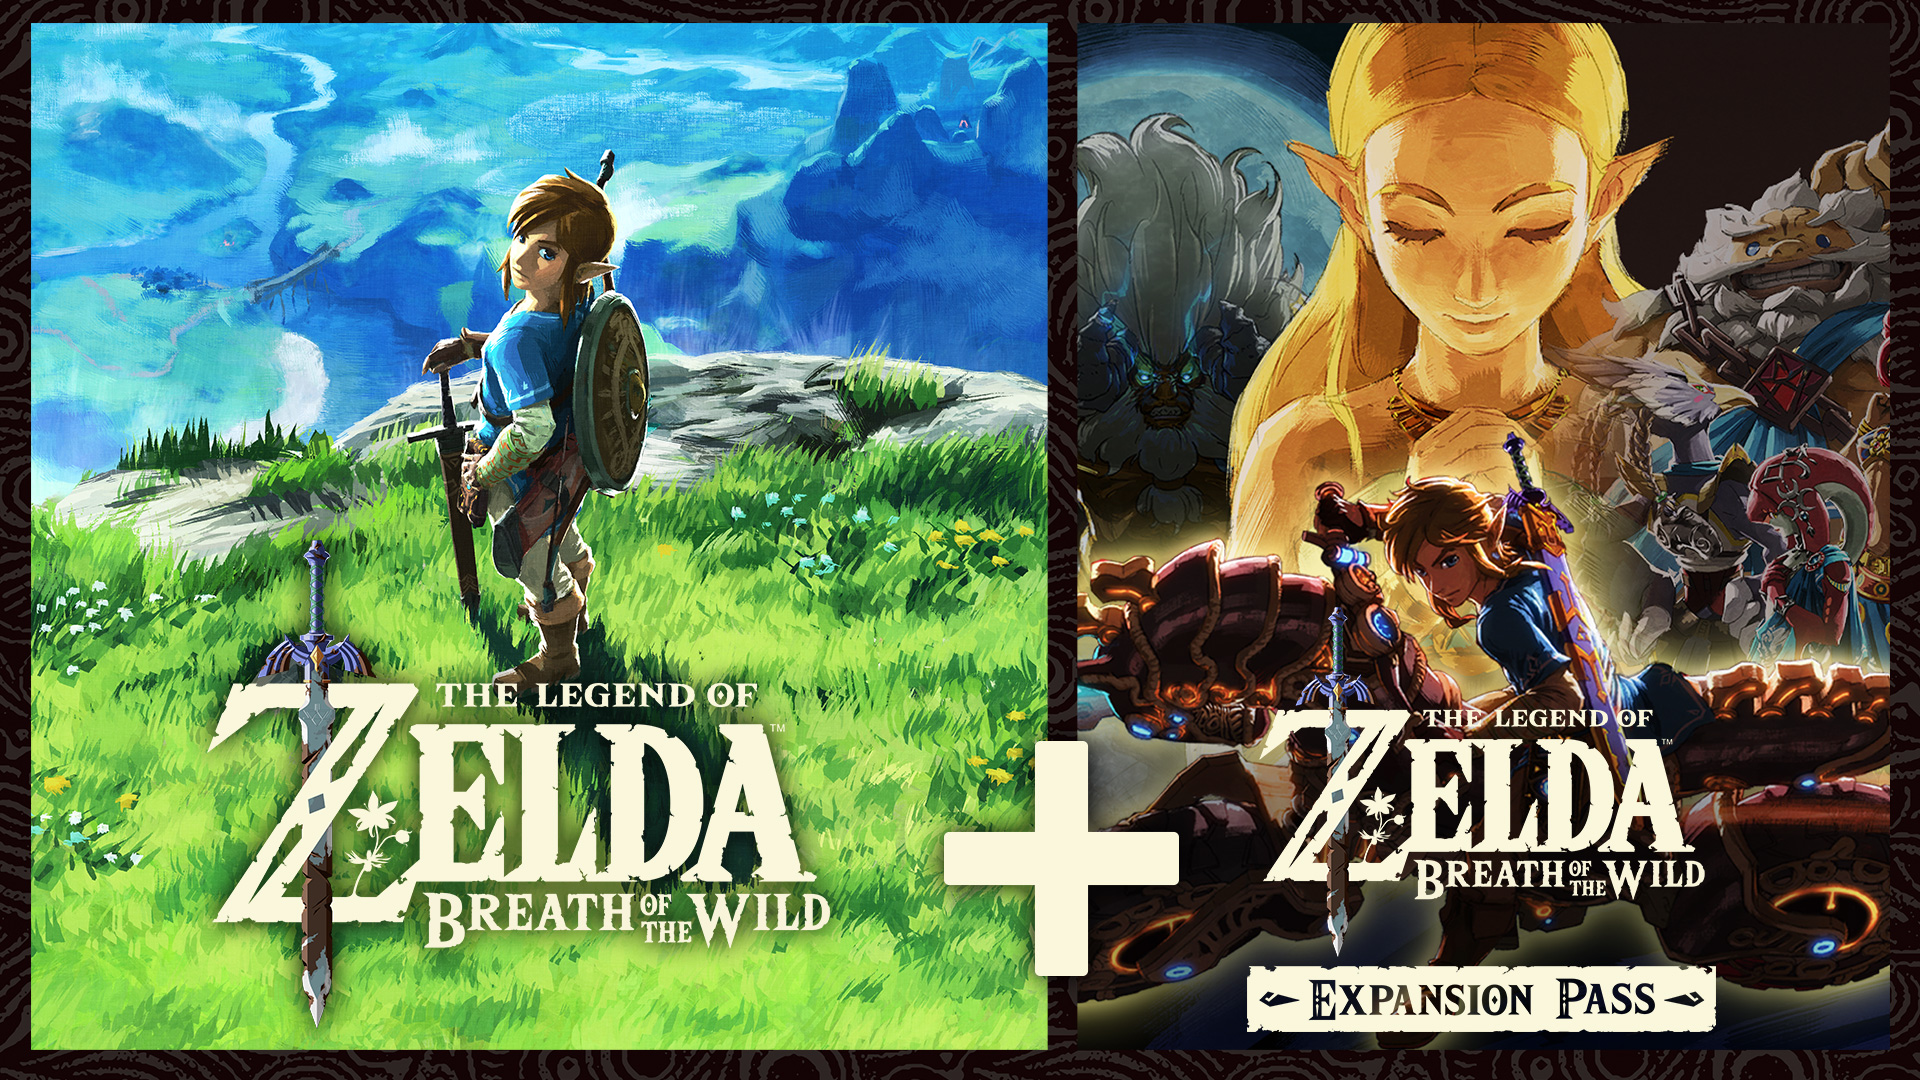 The Zelda: Breath of the Wild Expansion Pass DLC is Both